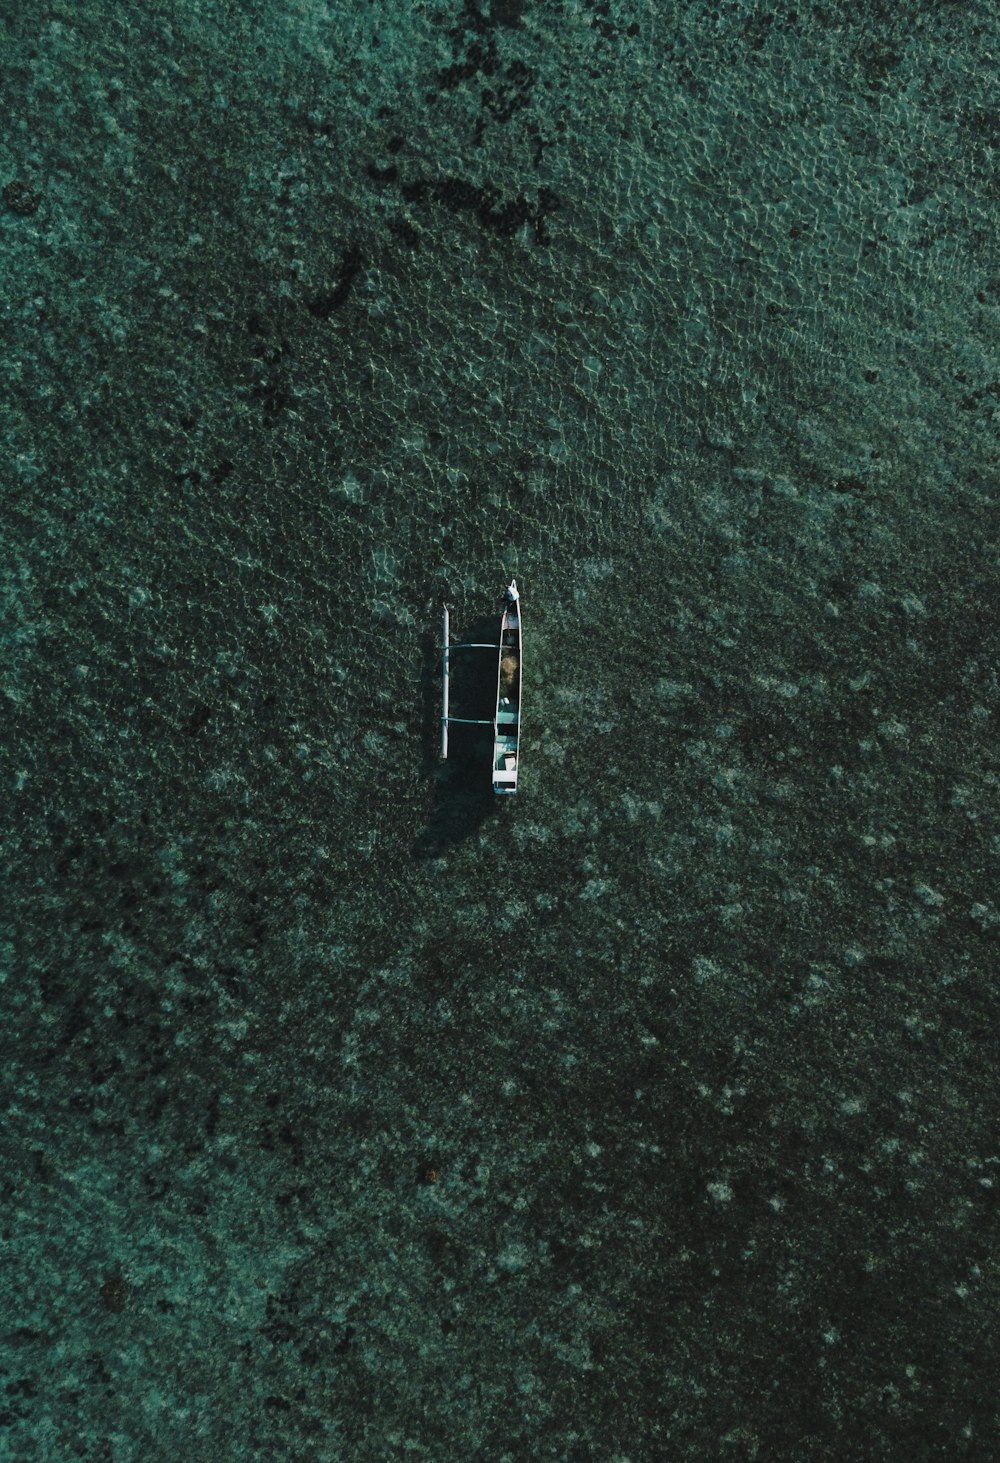 boat on green ground